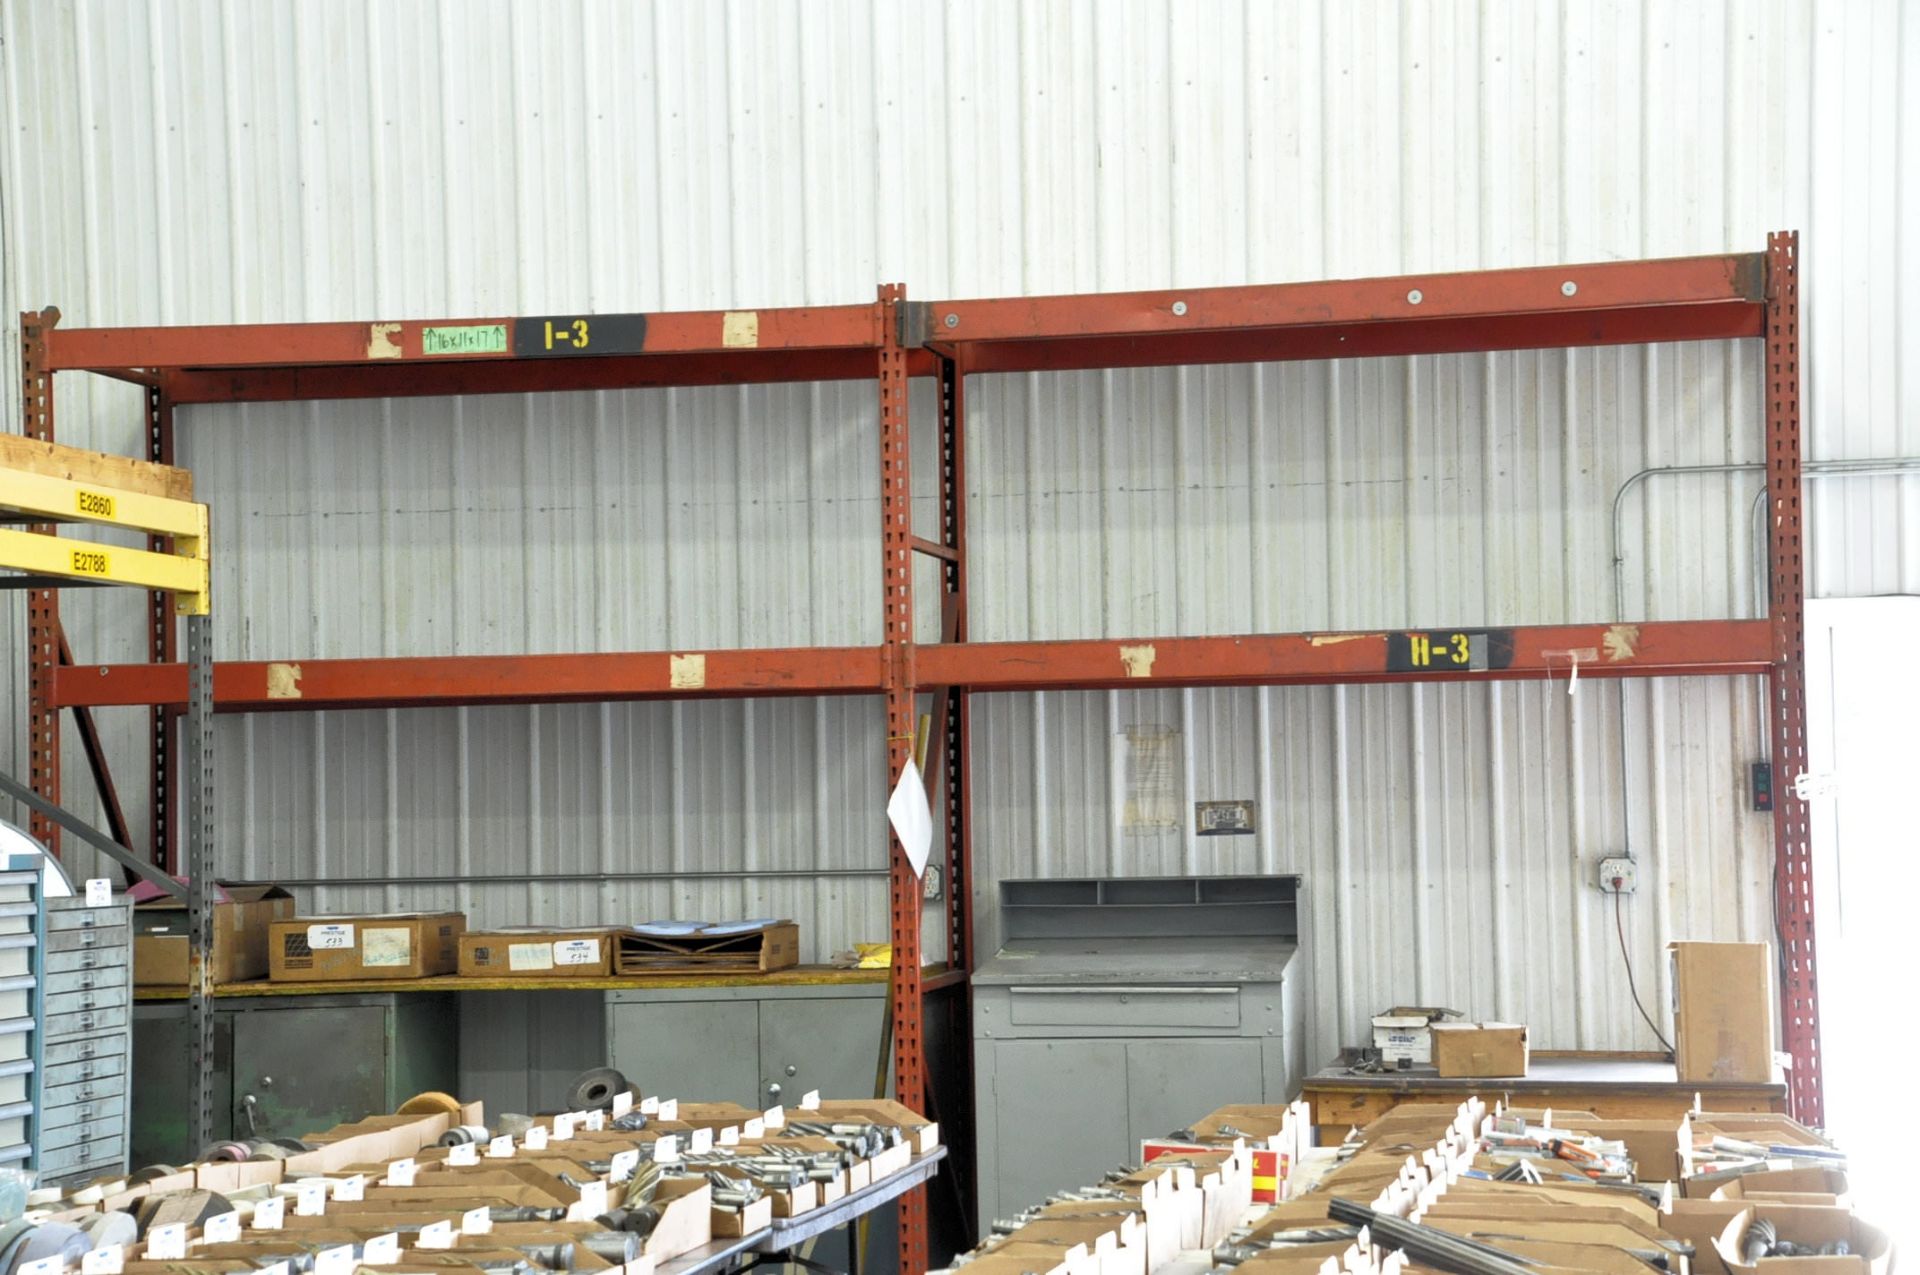 Lot-(6) Sections Various Pallet Racking, (Contents Not Included) (Not to Be Removed Until Empty), (B - Image 2 of 2